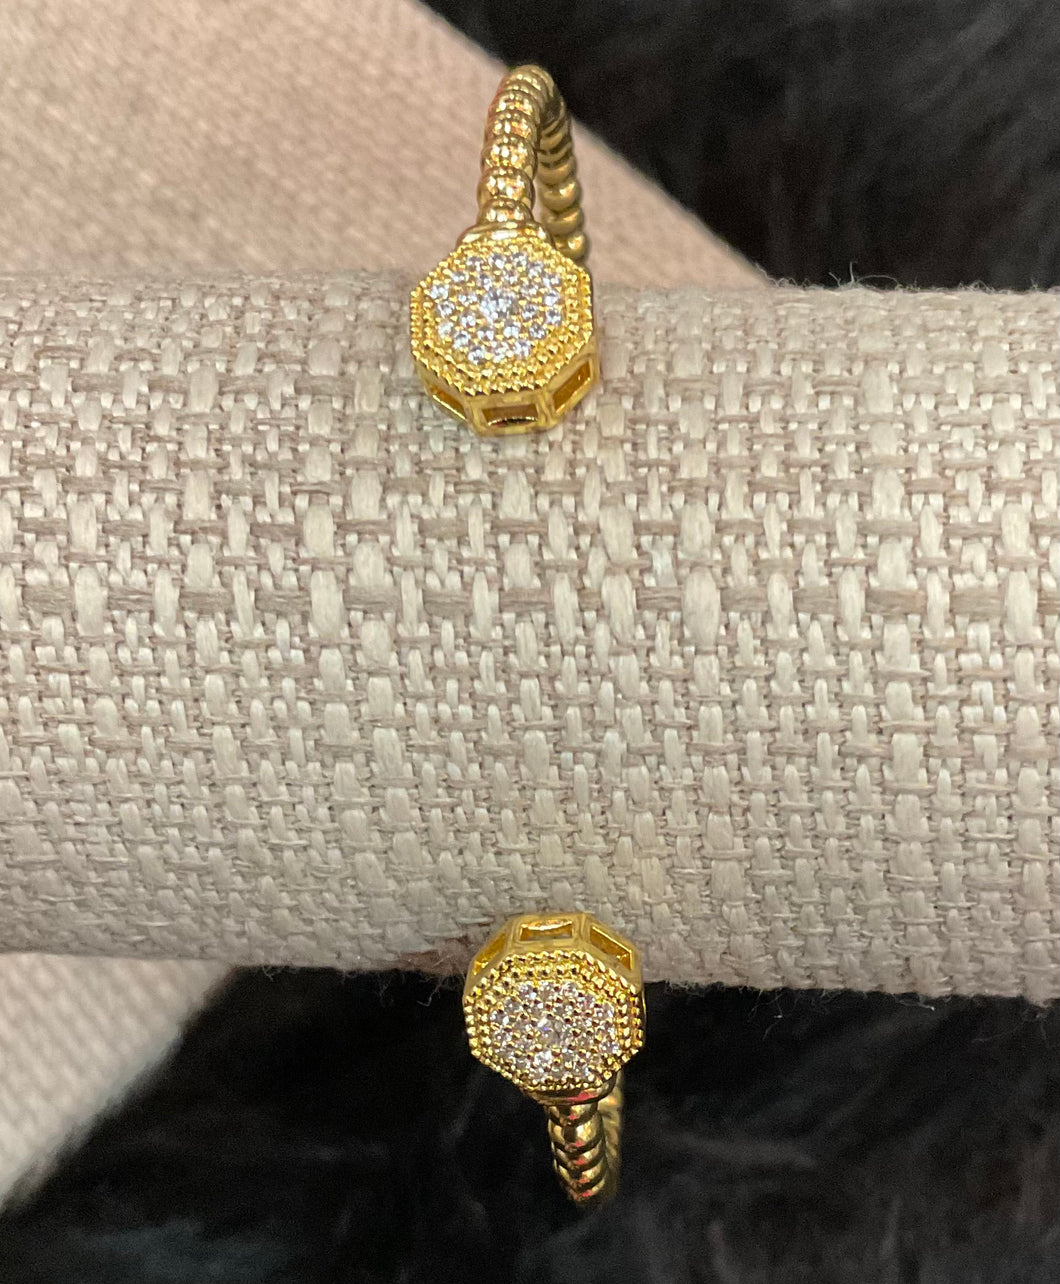 Gold Bracelet with Rhinestone Octagonal Accents